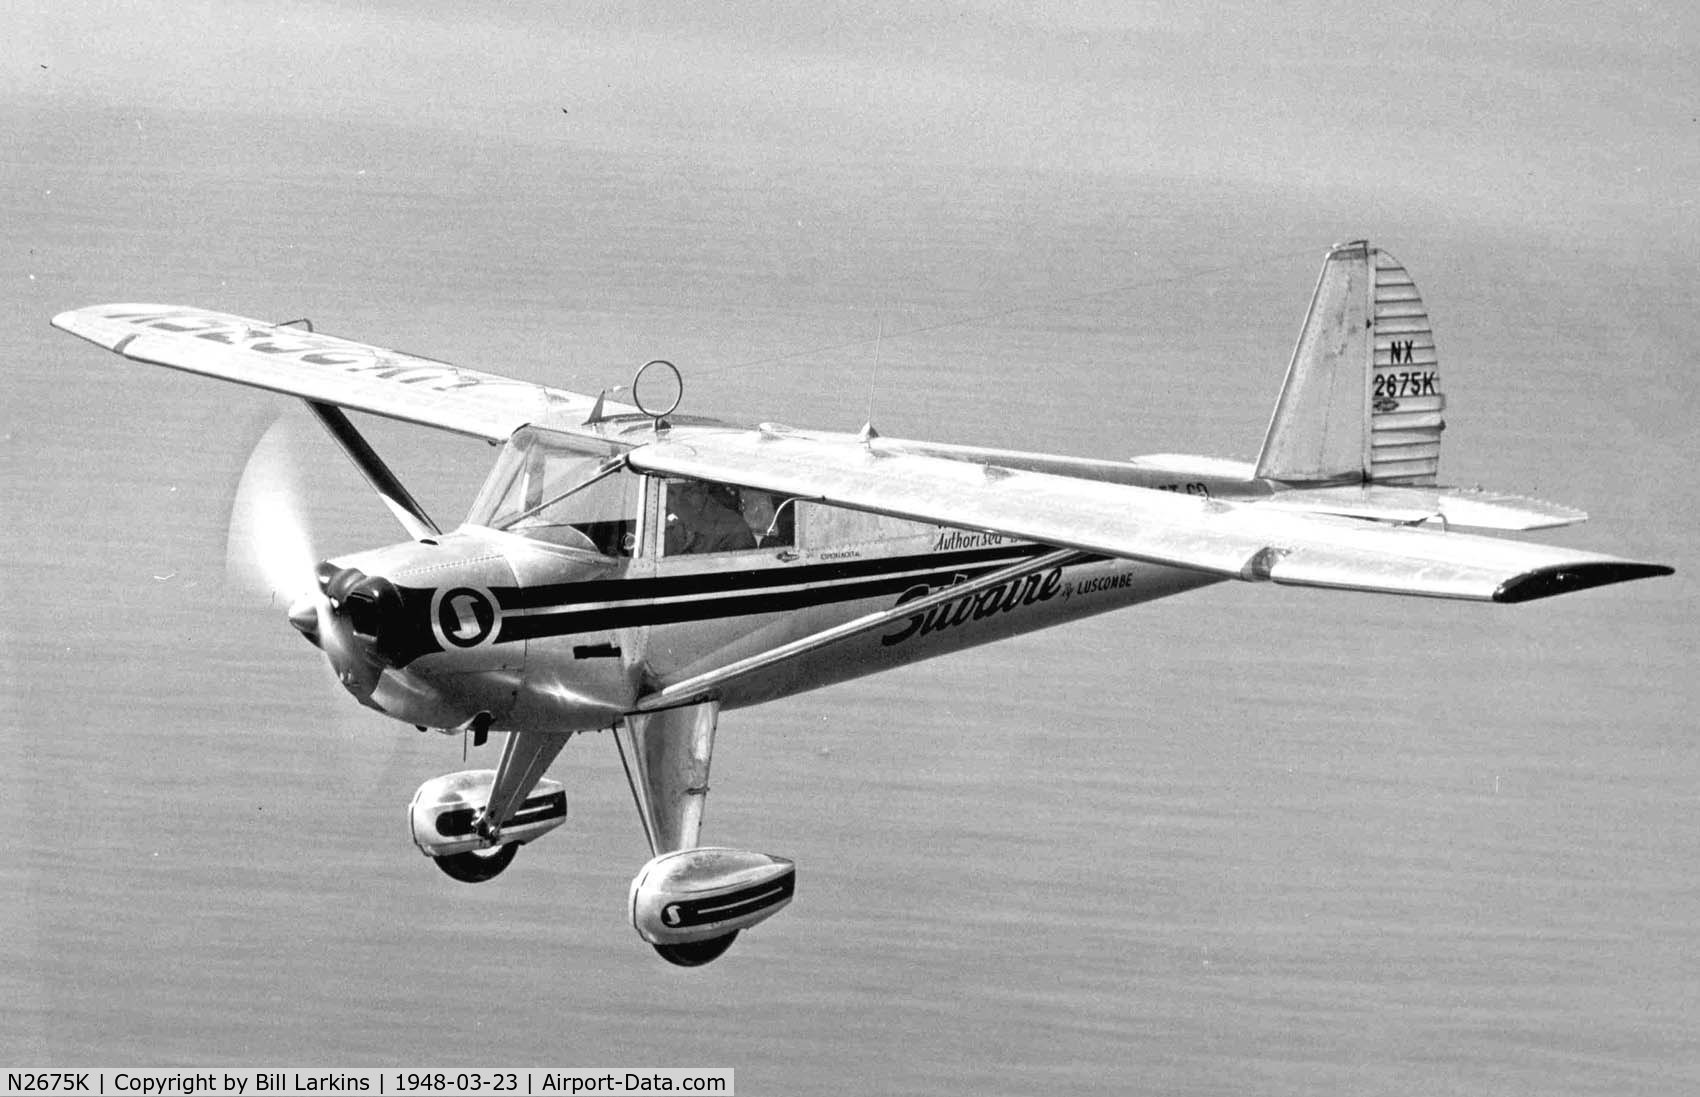 N2675K, 1947 Luscombe 8E Silvaire C/N 5402, 145 gal fuel injection NX for nonstop LA-NY flight .